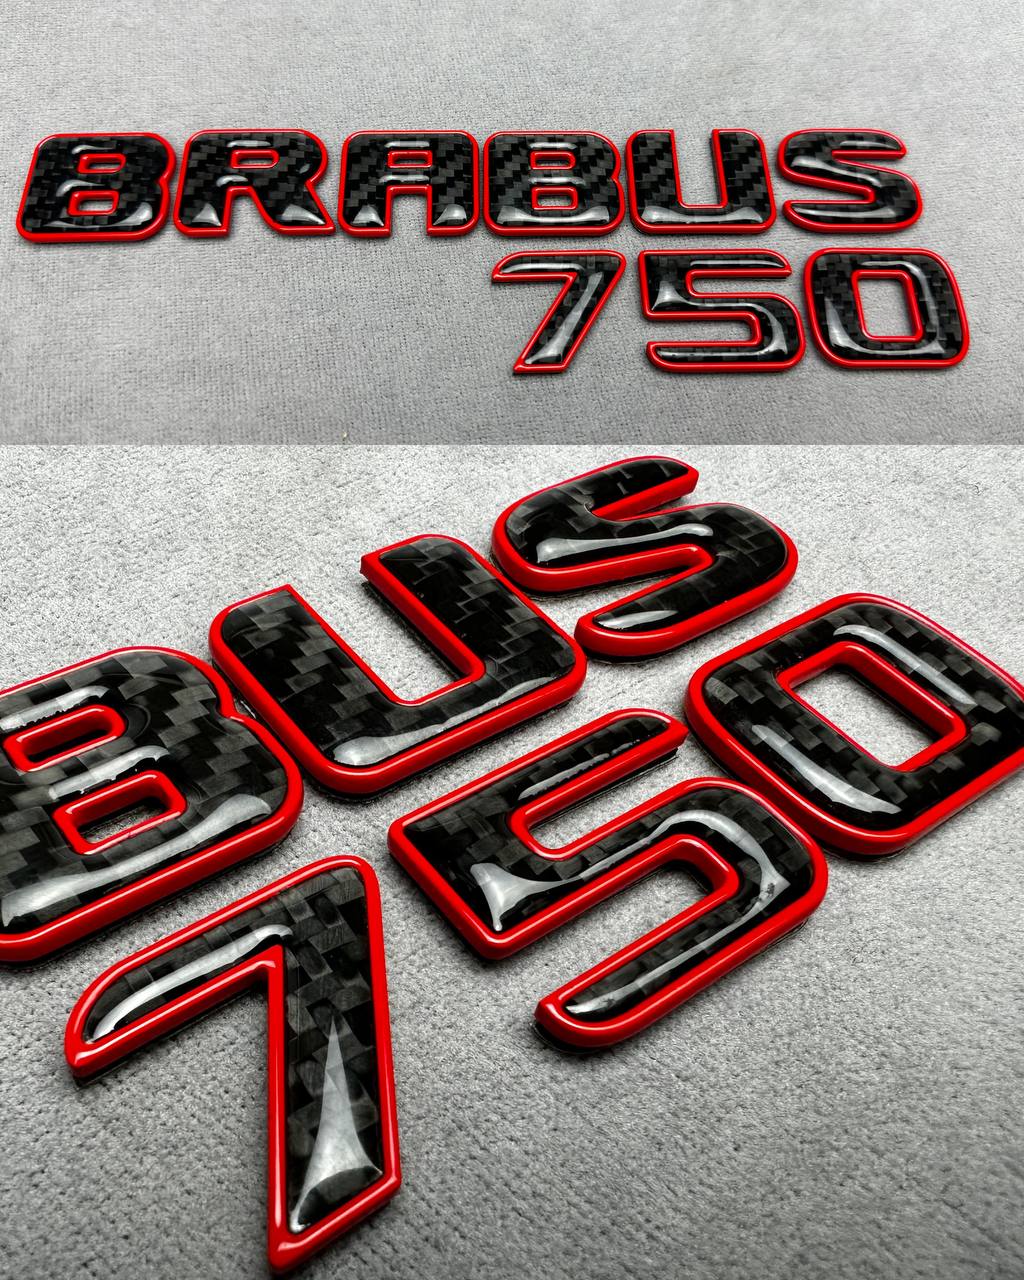 Brabus Emblem 1 of 1 ONE OF ONE interior for Mercedes Benz W463 W464  W463A G class GLE GLS GT E GLC S class W222 W223